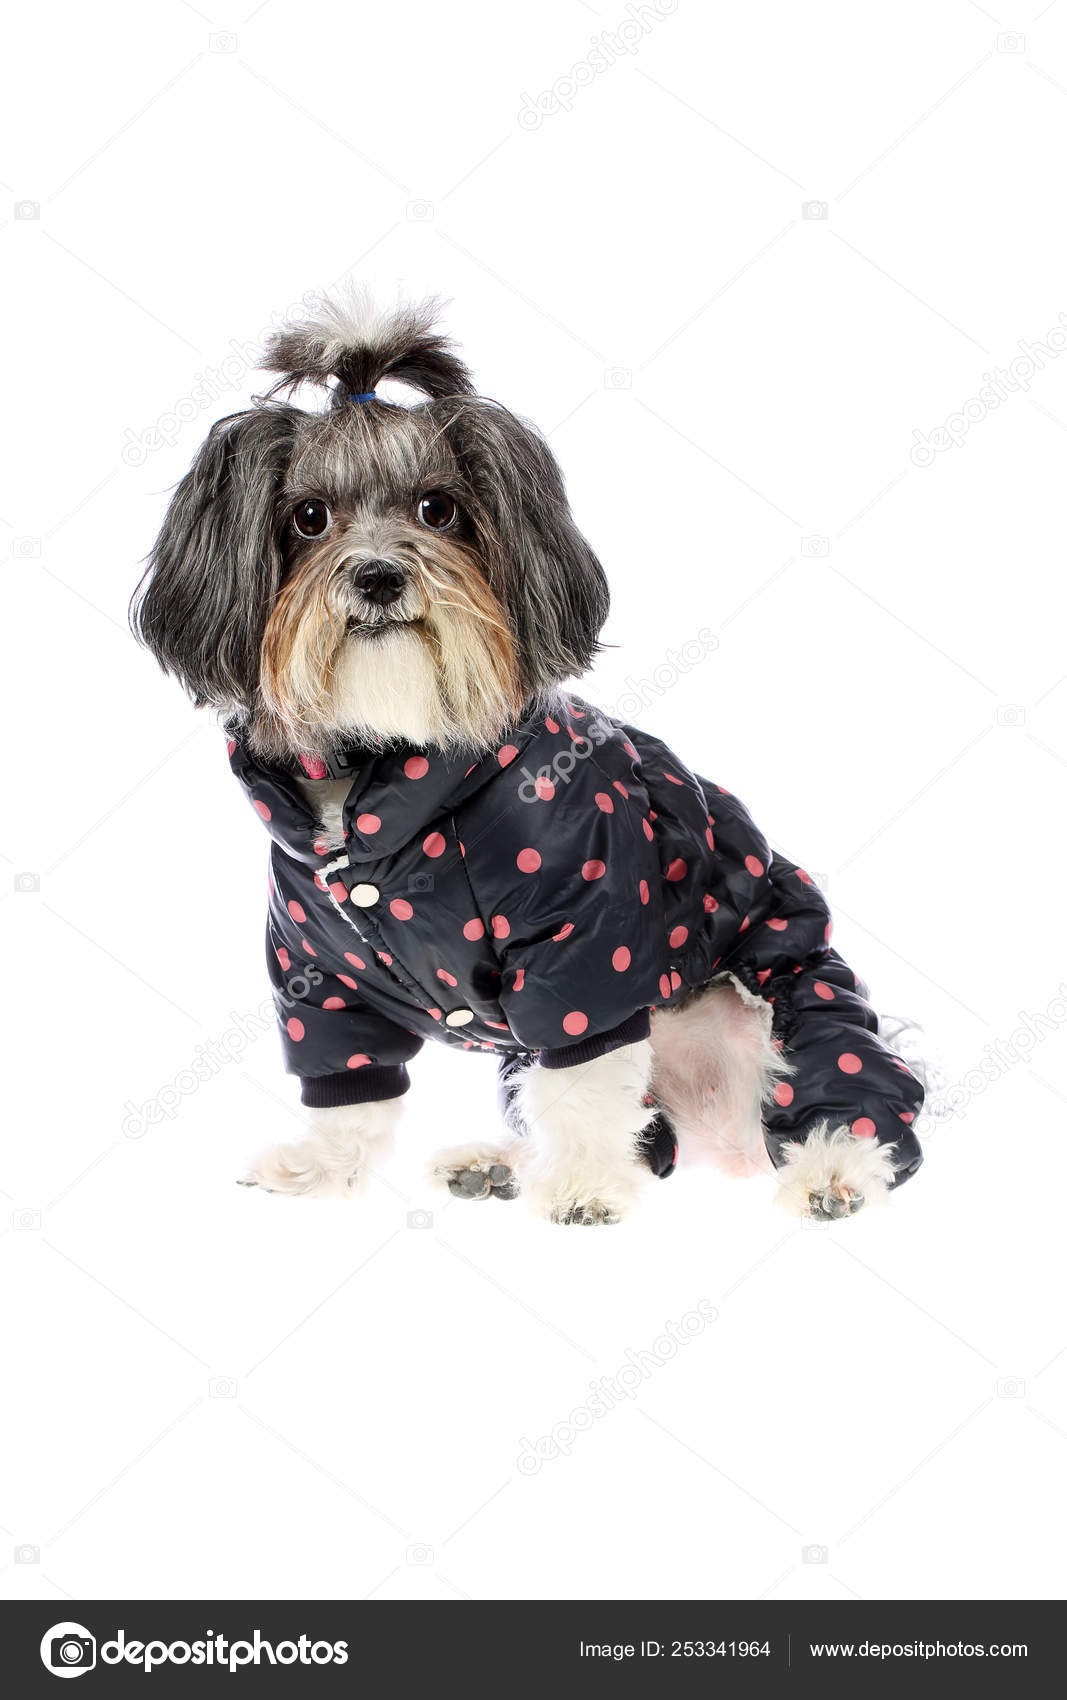 Cute And Funny Black White And Grey Bichon Havanese Dog Dressed With Warm Winter Coat With Legs In Dark Navy Blue And Pink Dots Isolated On White Background Stock Photo C